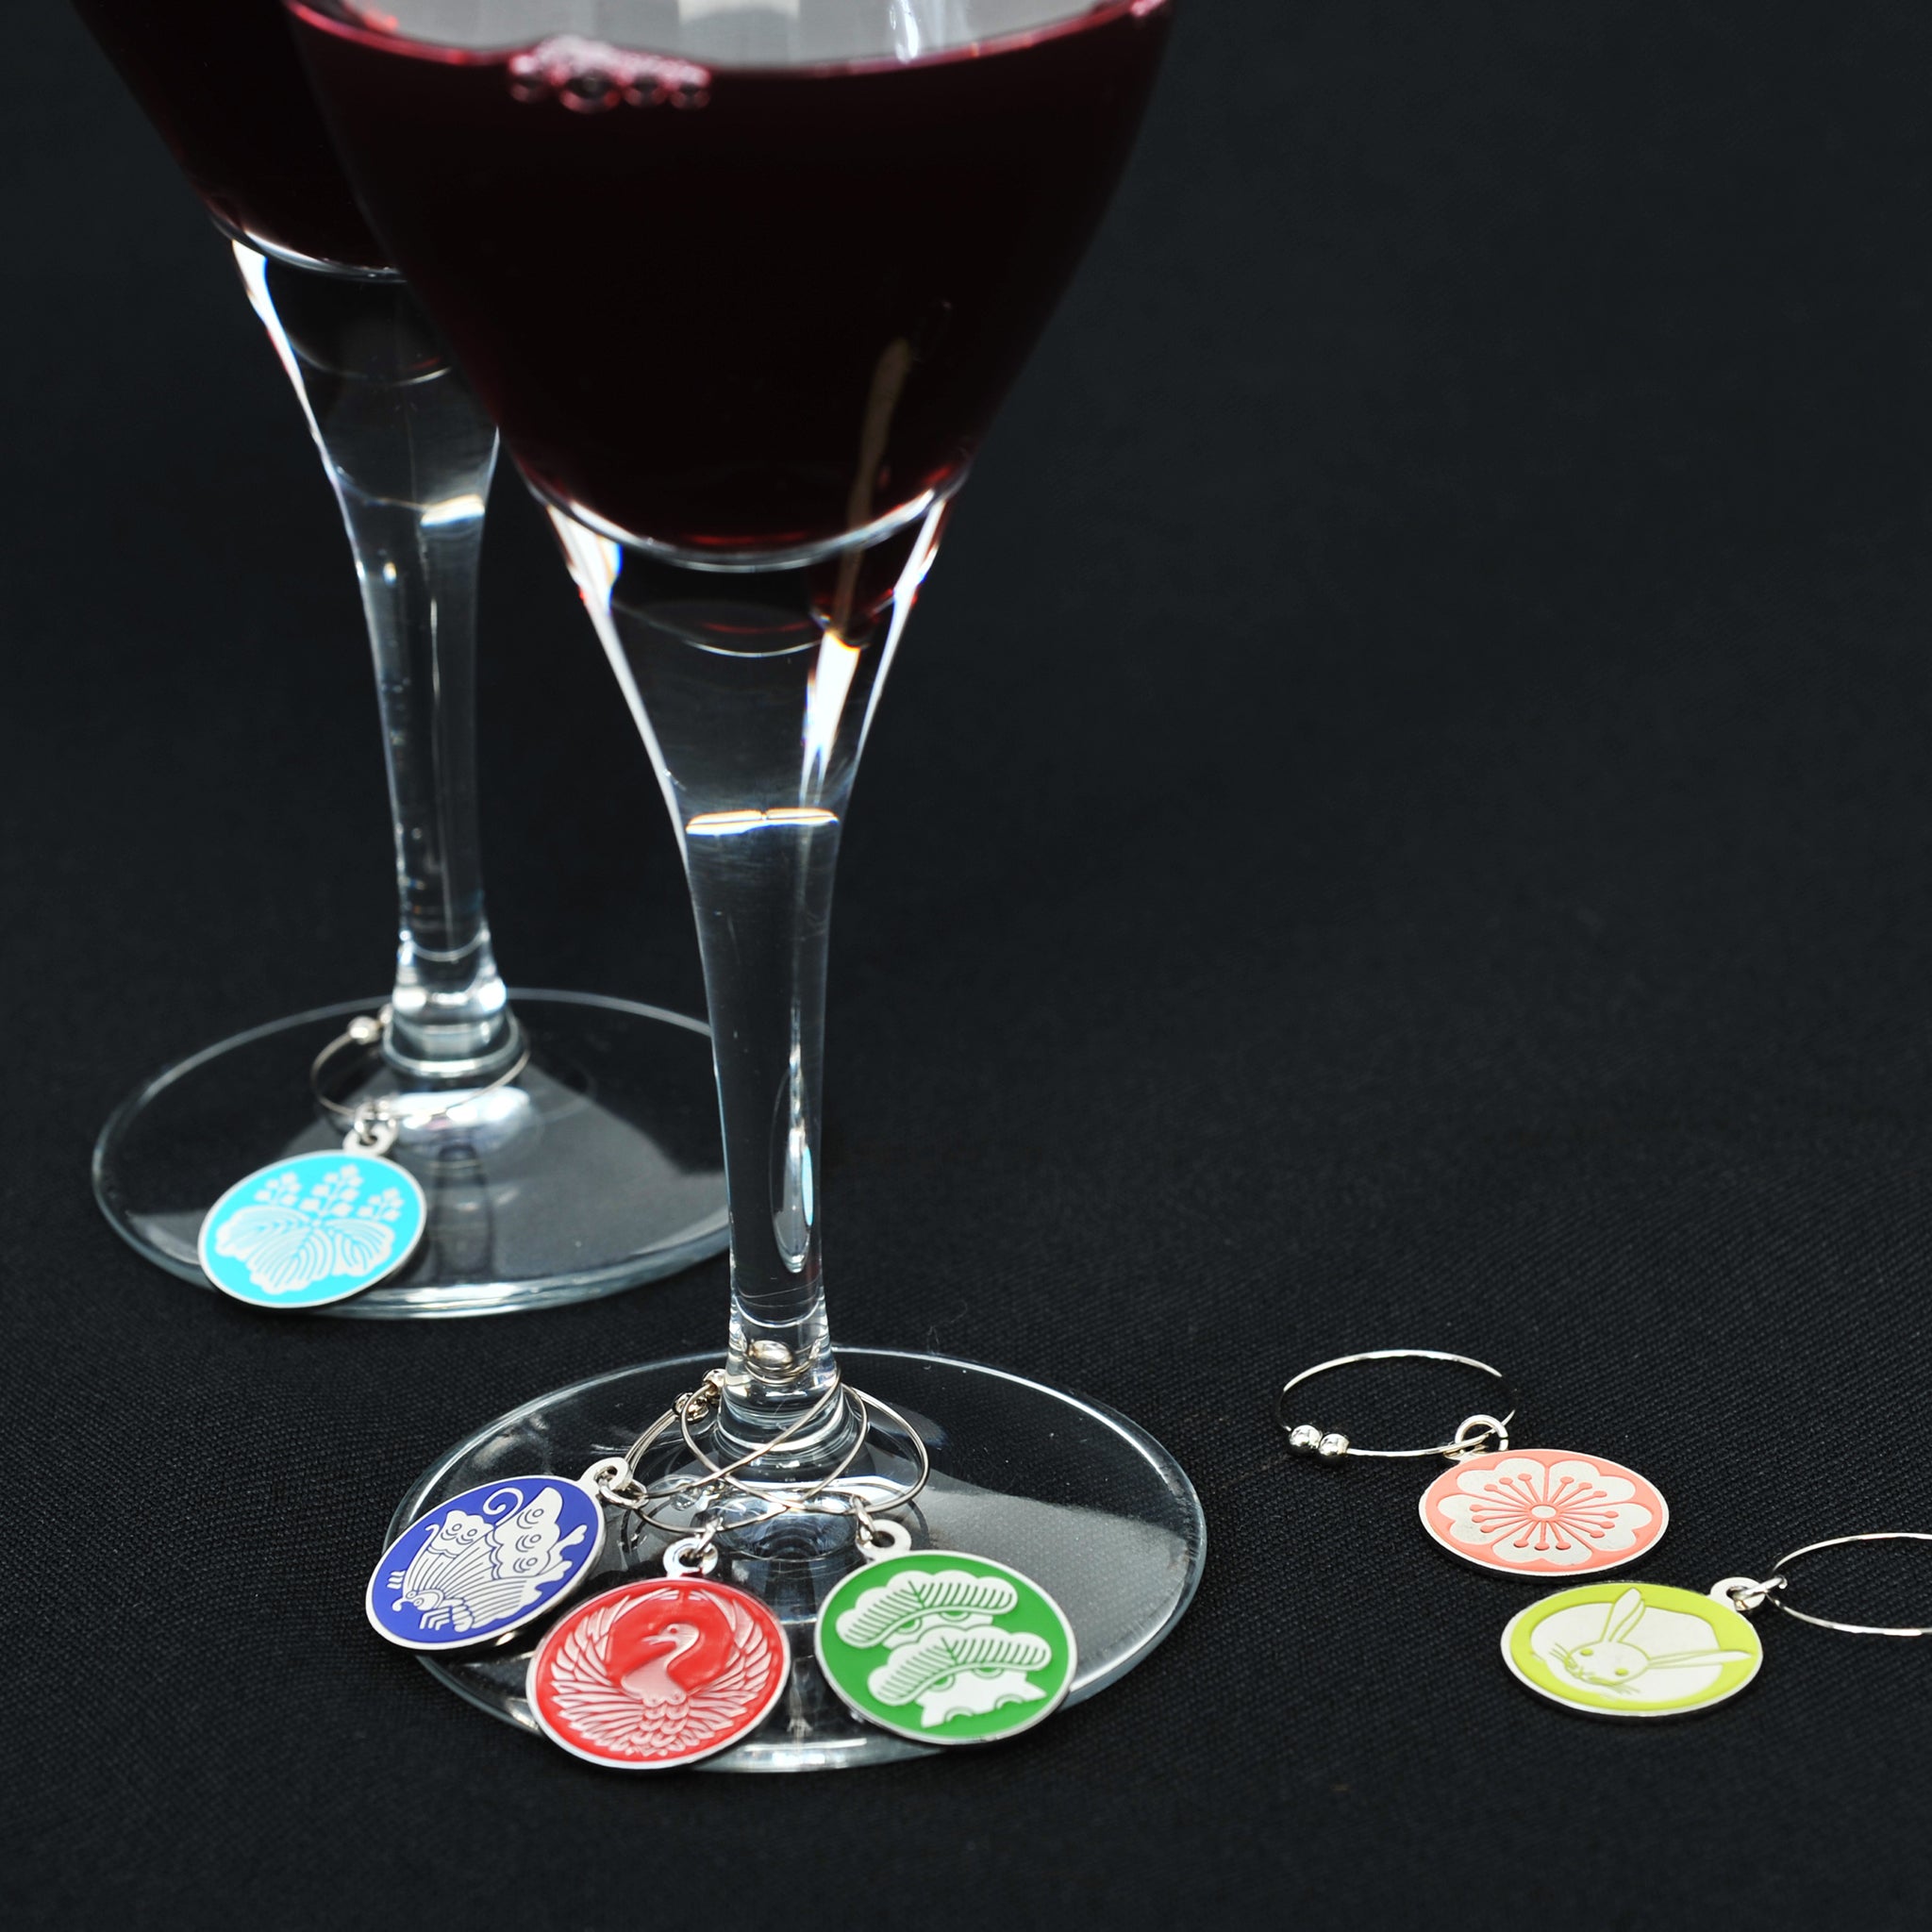 Wine Glass Markers <br> &lt; Japanese Family Crest &gt;